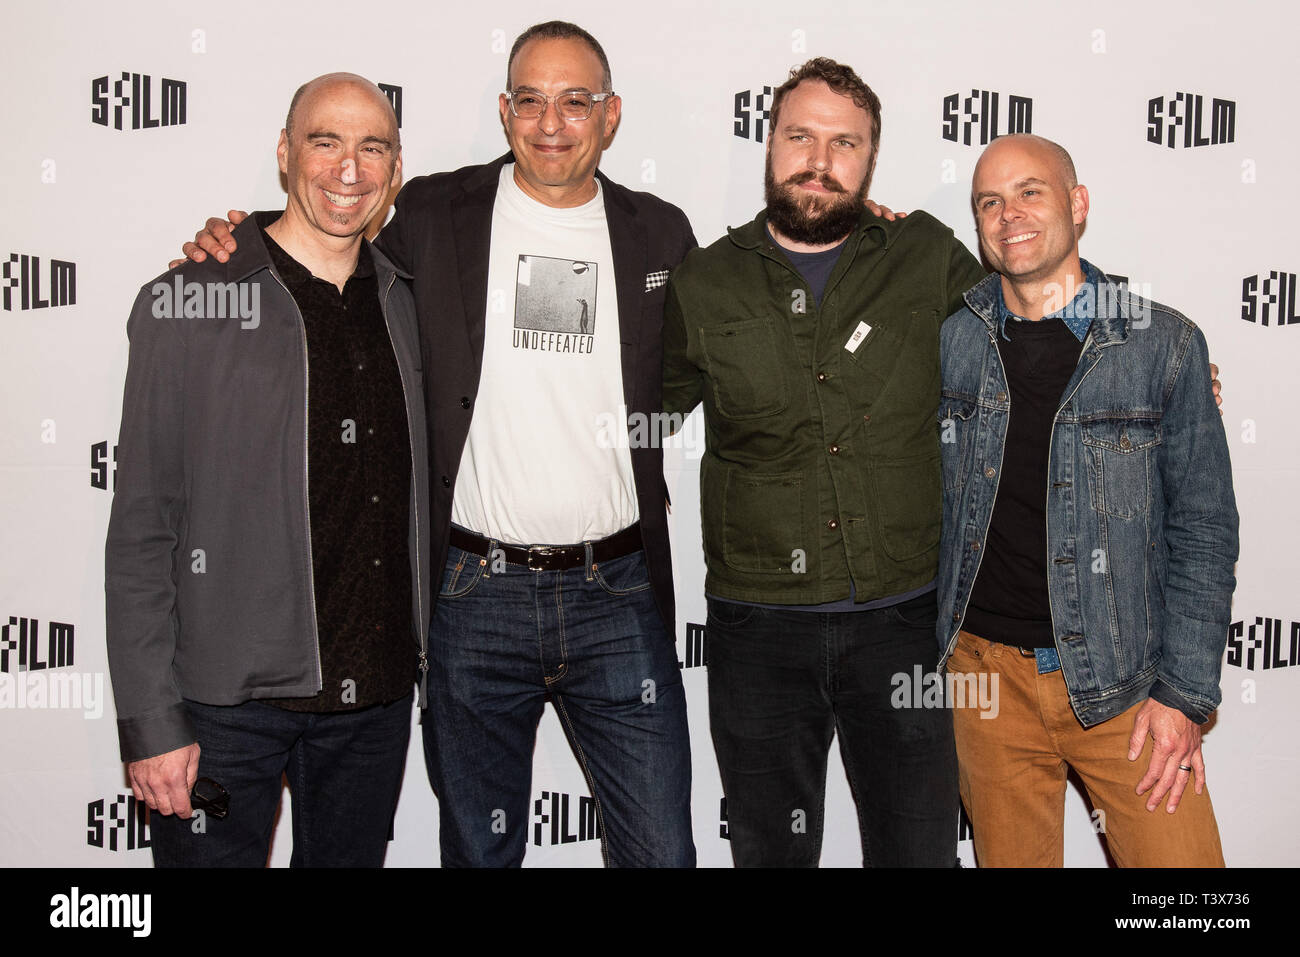 San Francisco, California, USA. 11th Apr, 2019. Composer Joel Goodman (L), Director Michael Tolajian, Cinematographer James Niebuhr and producer Jordan deBree (R) arrive at World Premiere screening of Q Ball at SF International Film Festival at Castro Theatre on April 11, 2019 in San Francisco, California. ( Credit: Chris Tuite/Image Space/Media Punch)/Alamy Live News Stock Photo